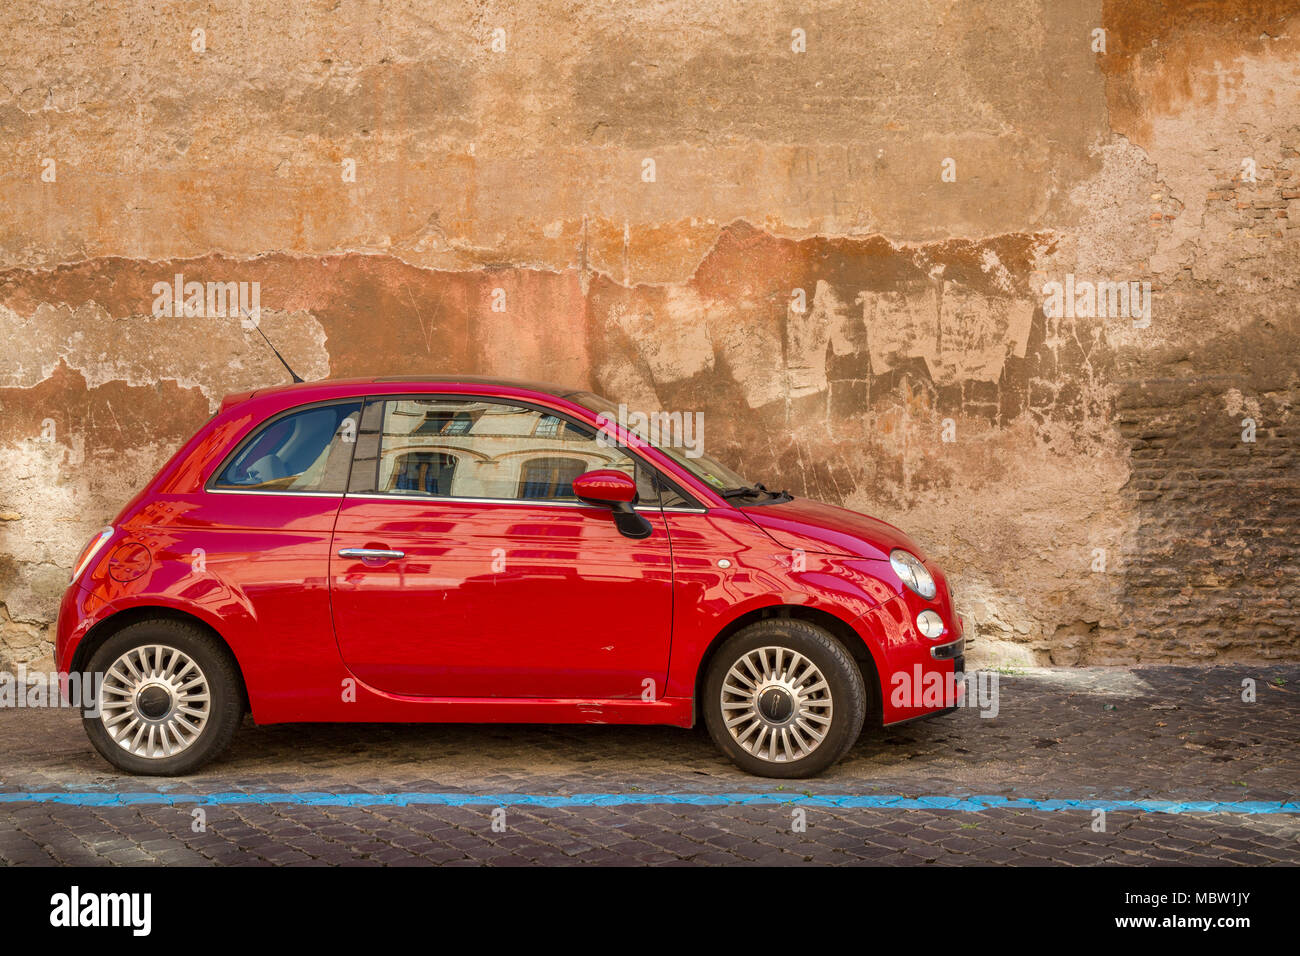 Red Fiat 500 car parked on a cobbled street in Rome, Italy, the blue line means a it's a pay to park bay with parking meters nearby where you can buy  Stock Photo